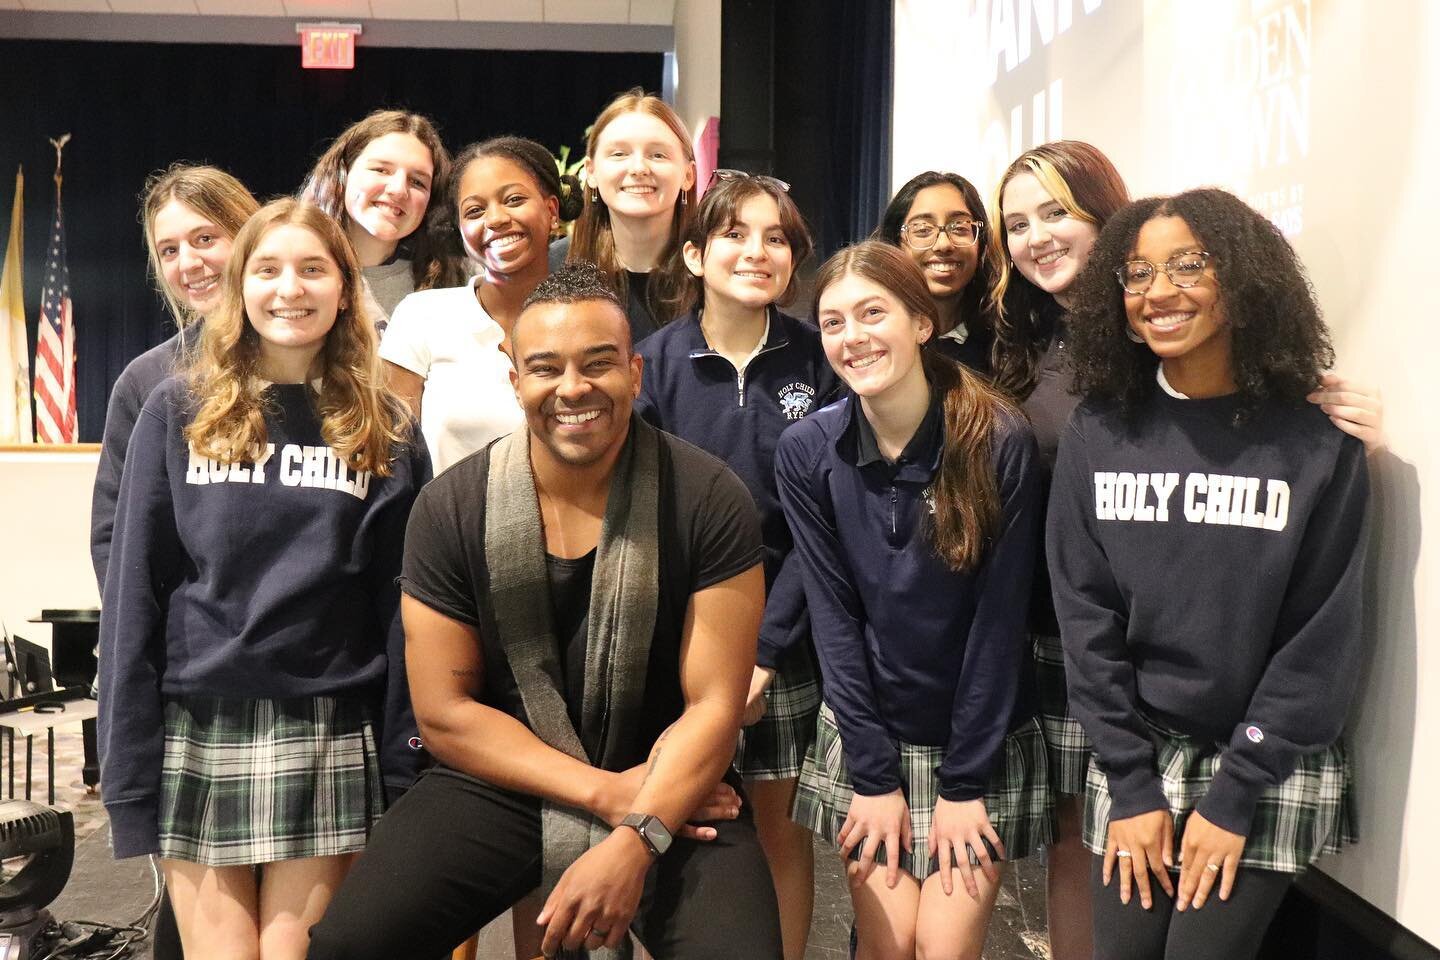 Today, our students welcomed Austin-based slam poet Andre Bradford (@scsays). @scsays shared the importance of empathy in being a decent human being and covered topics like racial discrimination, impulse assumptions, mental health, and moment-to-mome